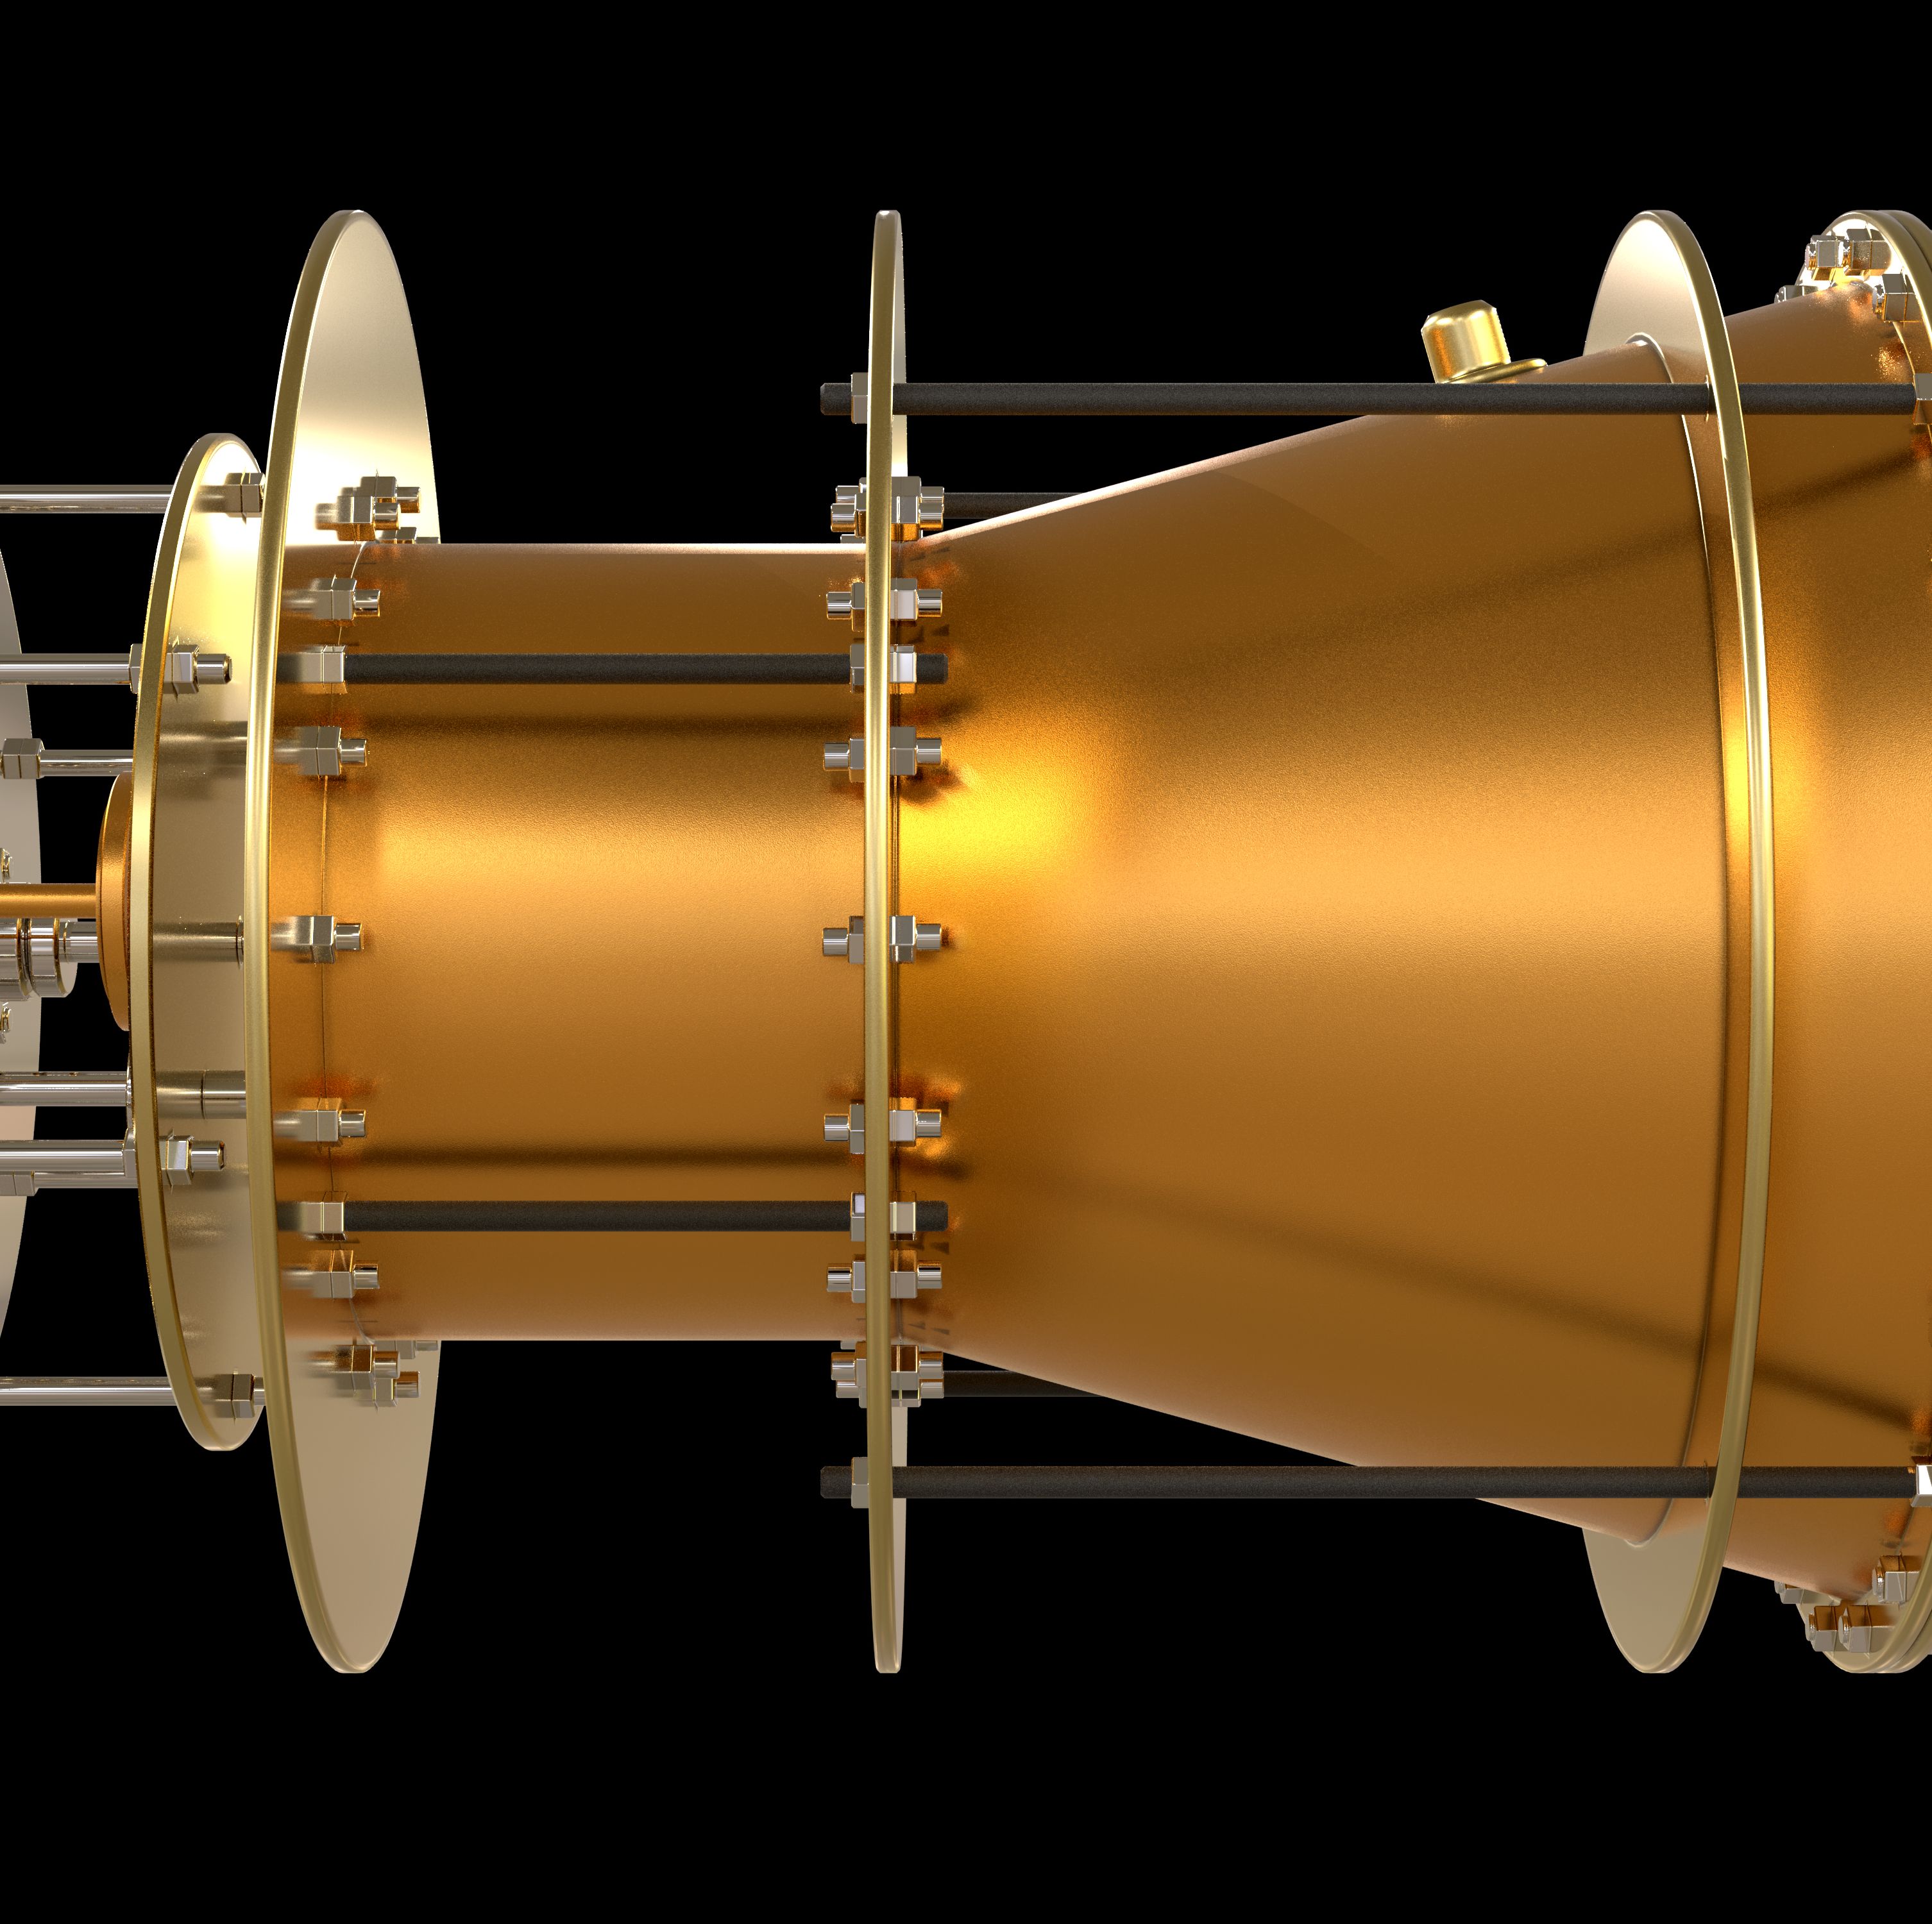 Scientists Just Killed the EmDrive